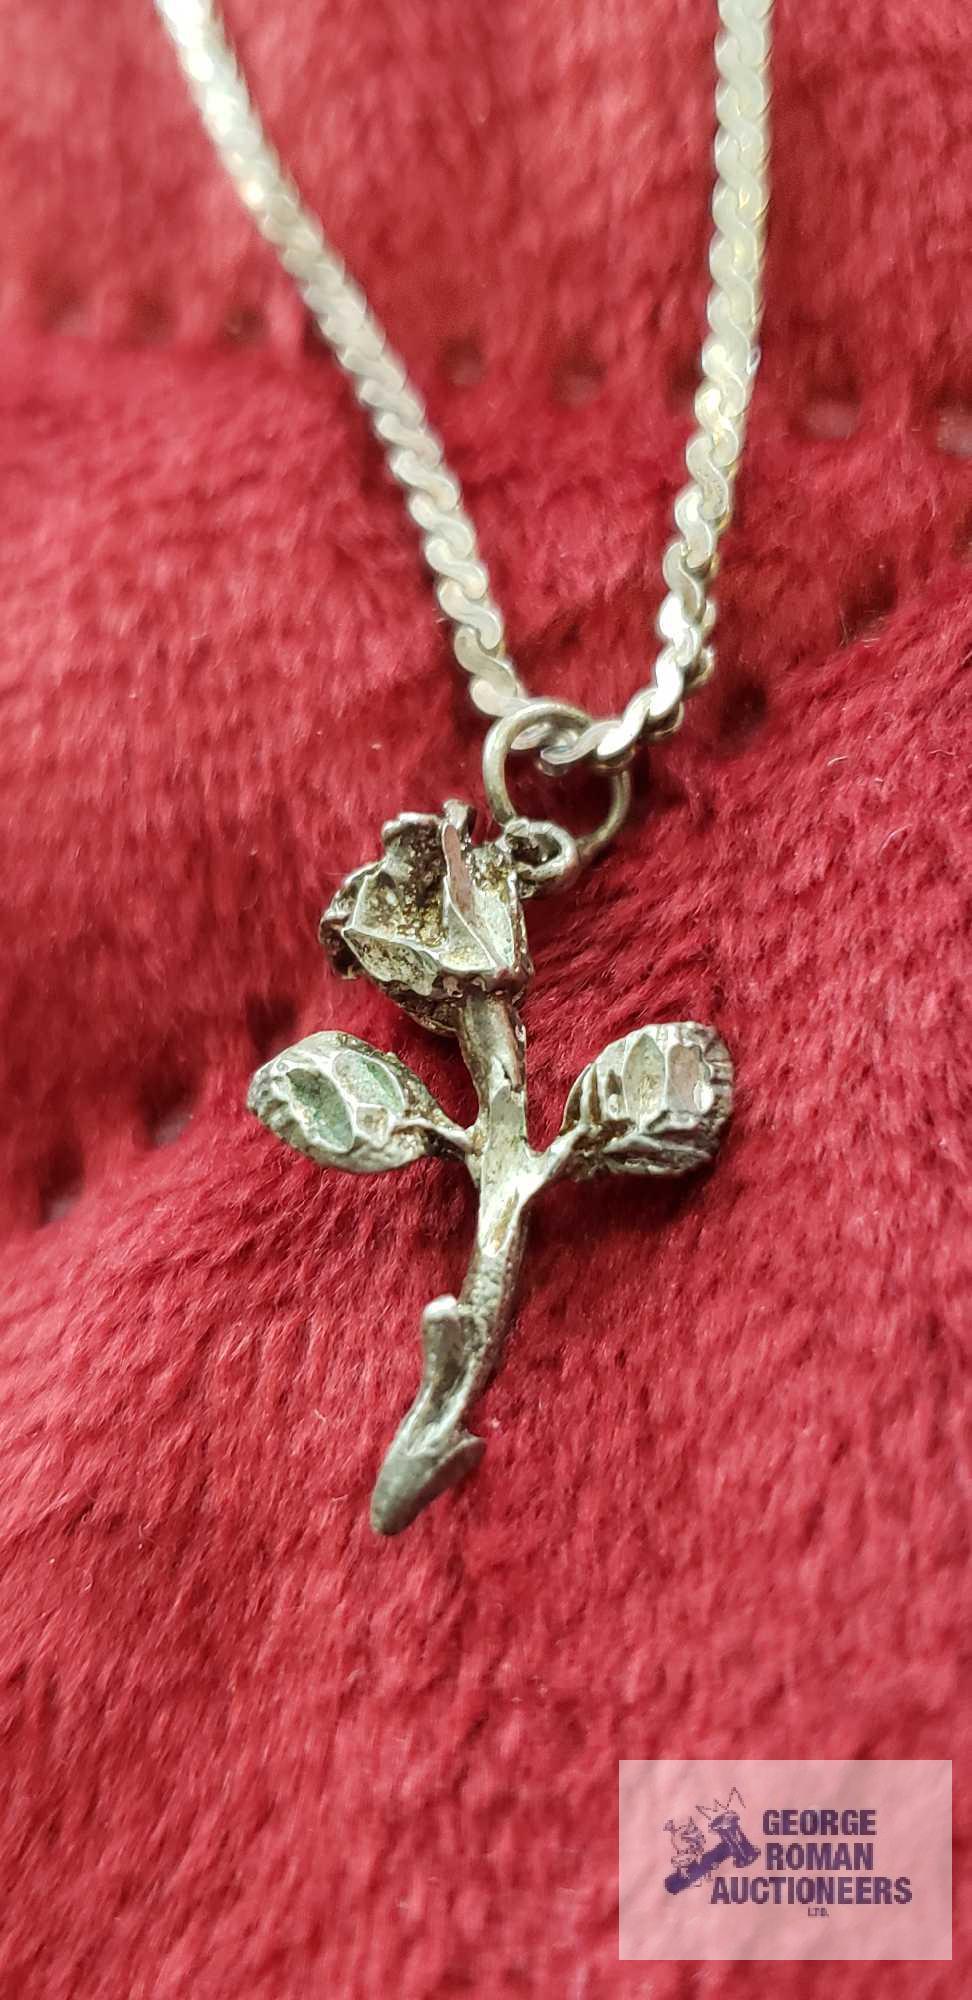 Silver rose pendant, marked Sterling on silver colored necklace, marked B. David Sterling,